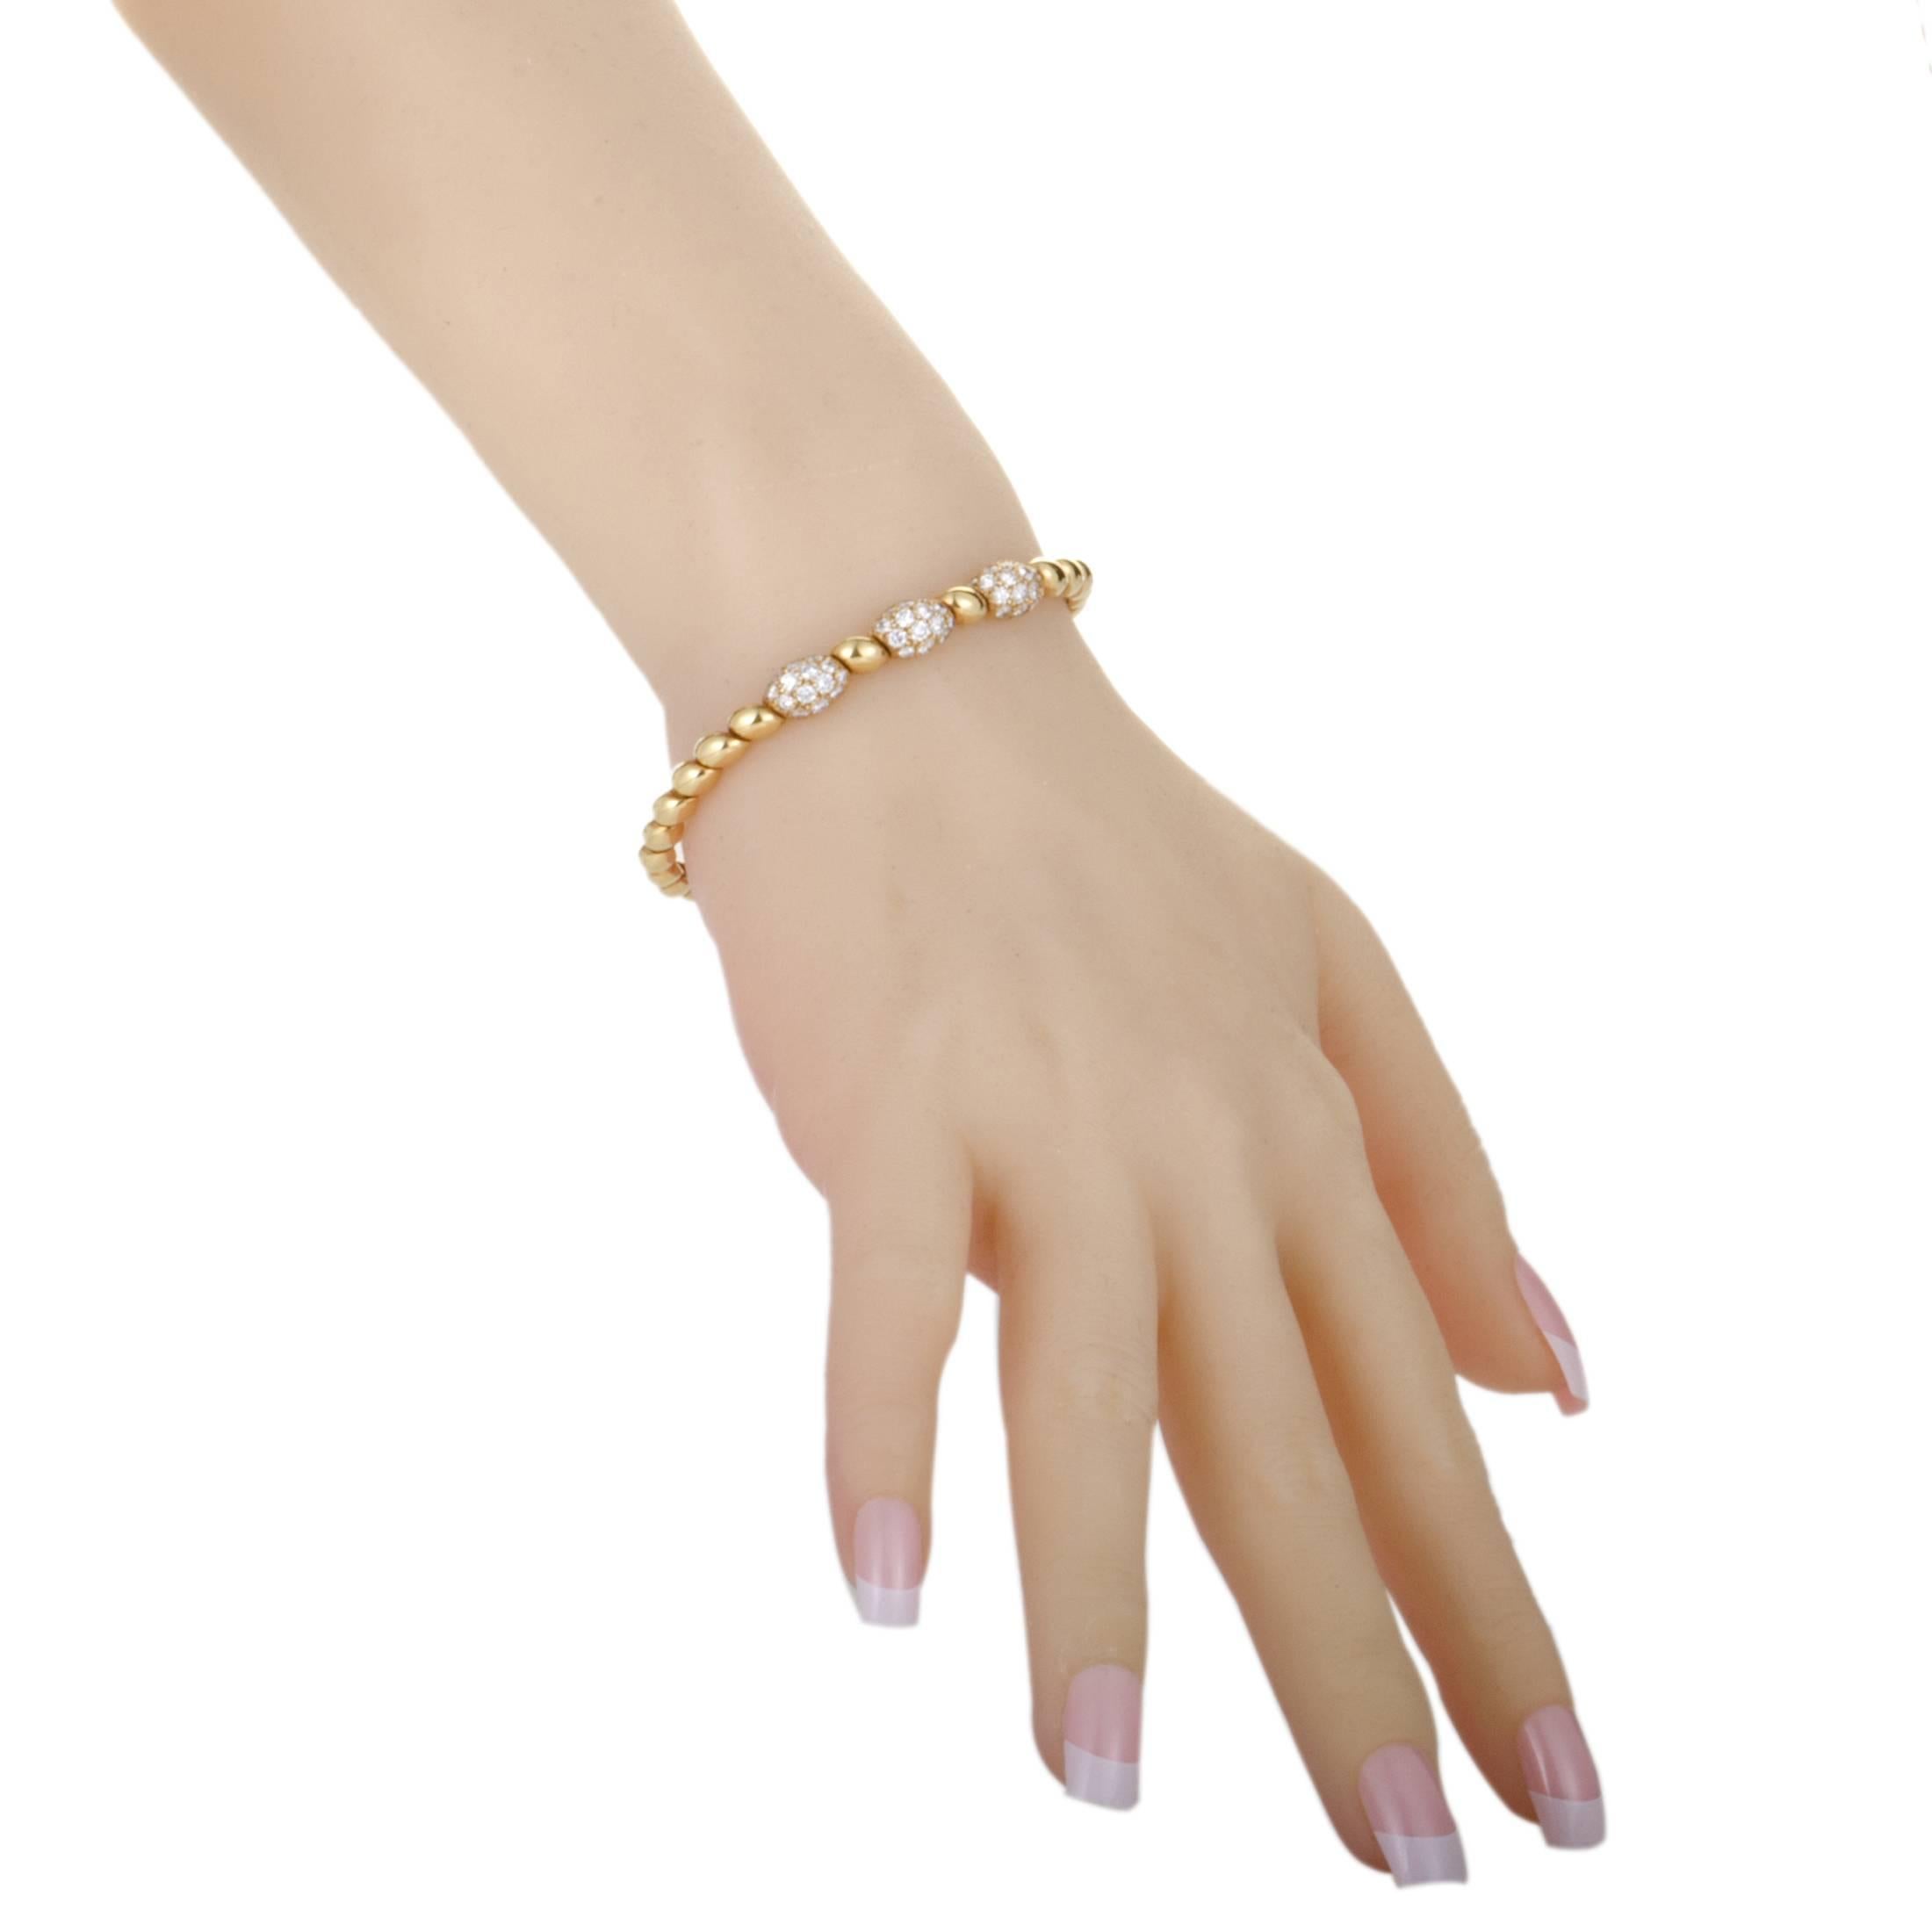 This vintage bracelet by Van Cleef & Arpels is extremely exquisite in design and style. The breathtaking item is lavishly designed in 18K yellow gold, featuring 1.85ct of sparkling diamonds that elevate the captivating beauty of the